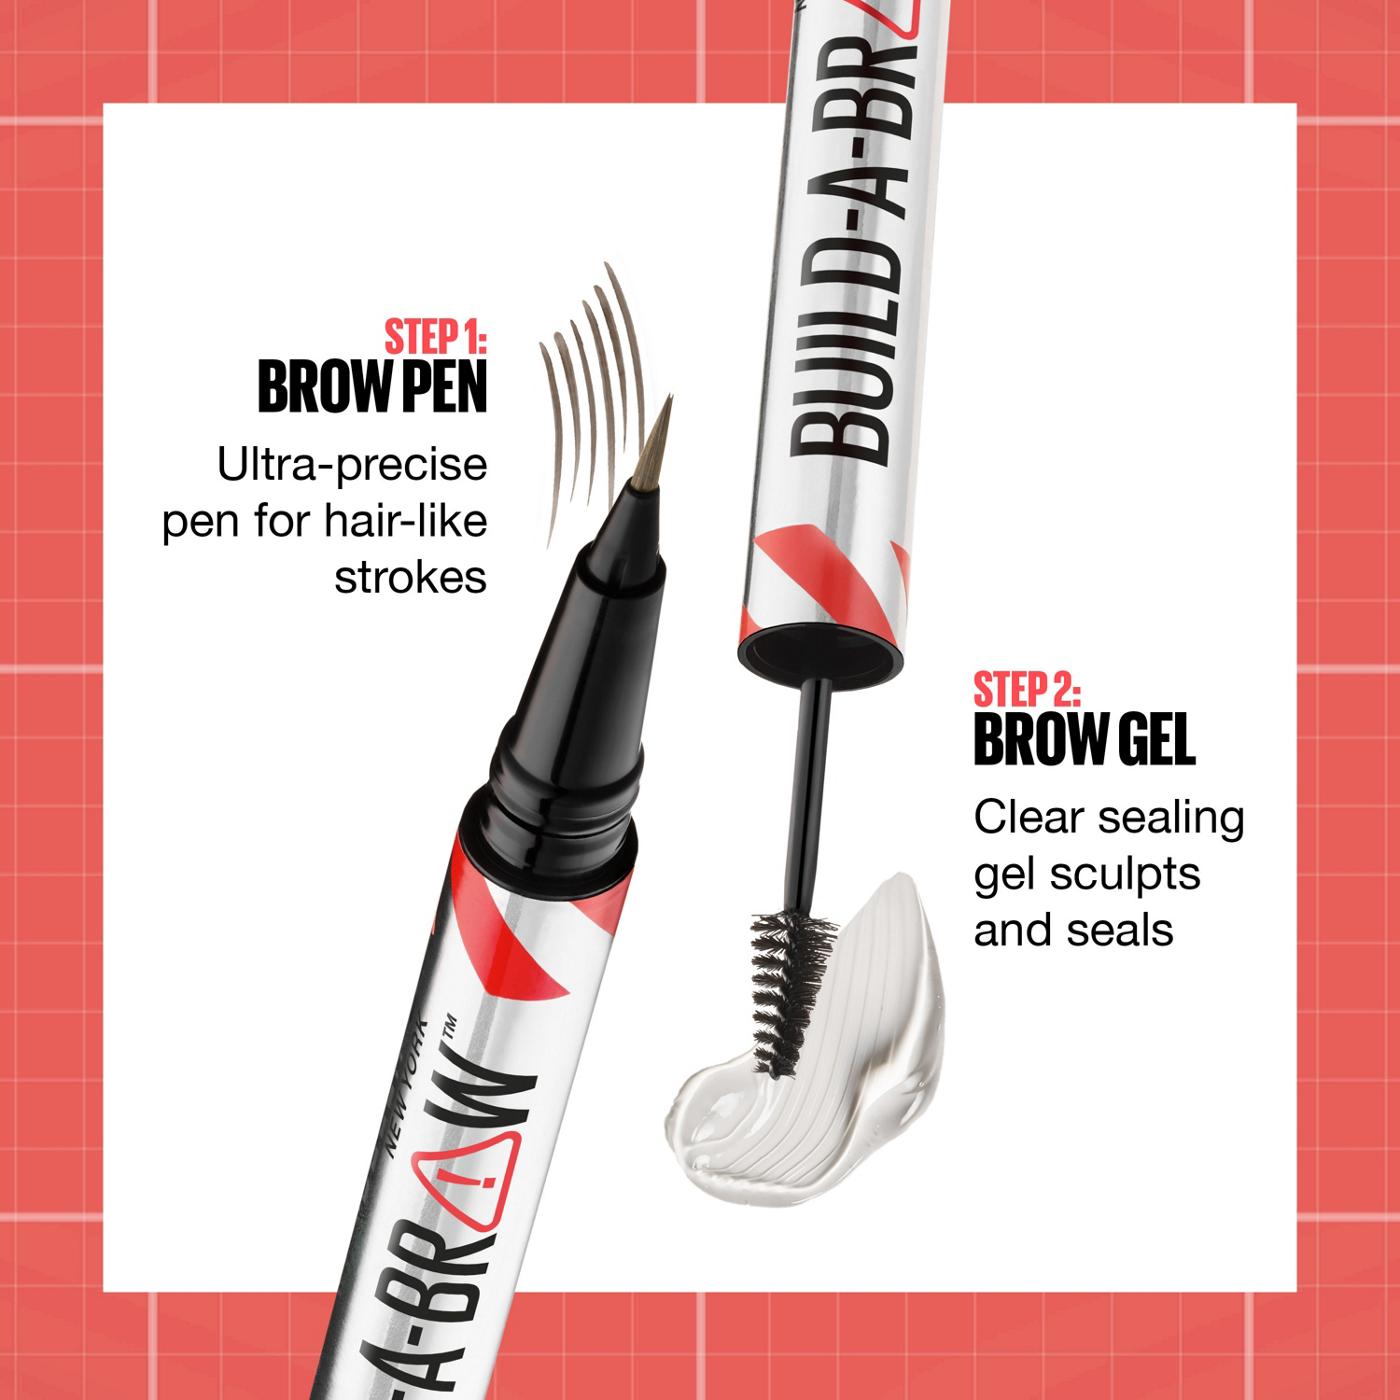 Maybelline Build A Brow 2 In 1 Brow Pen - Soft Brown; image 14 of 16